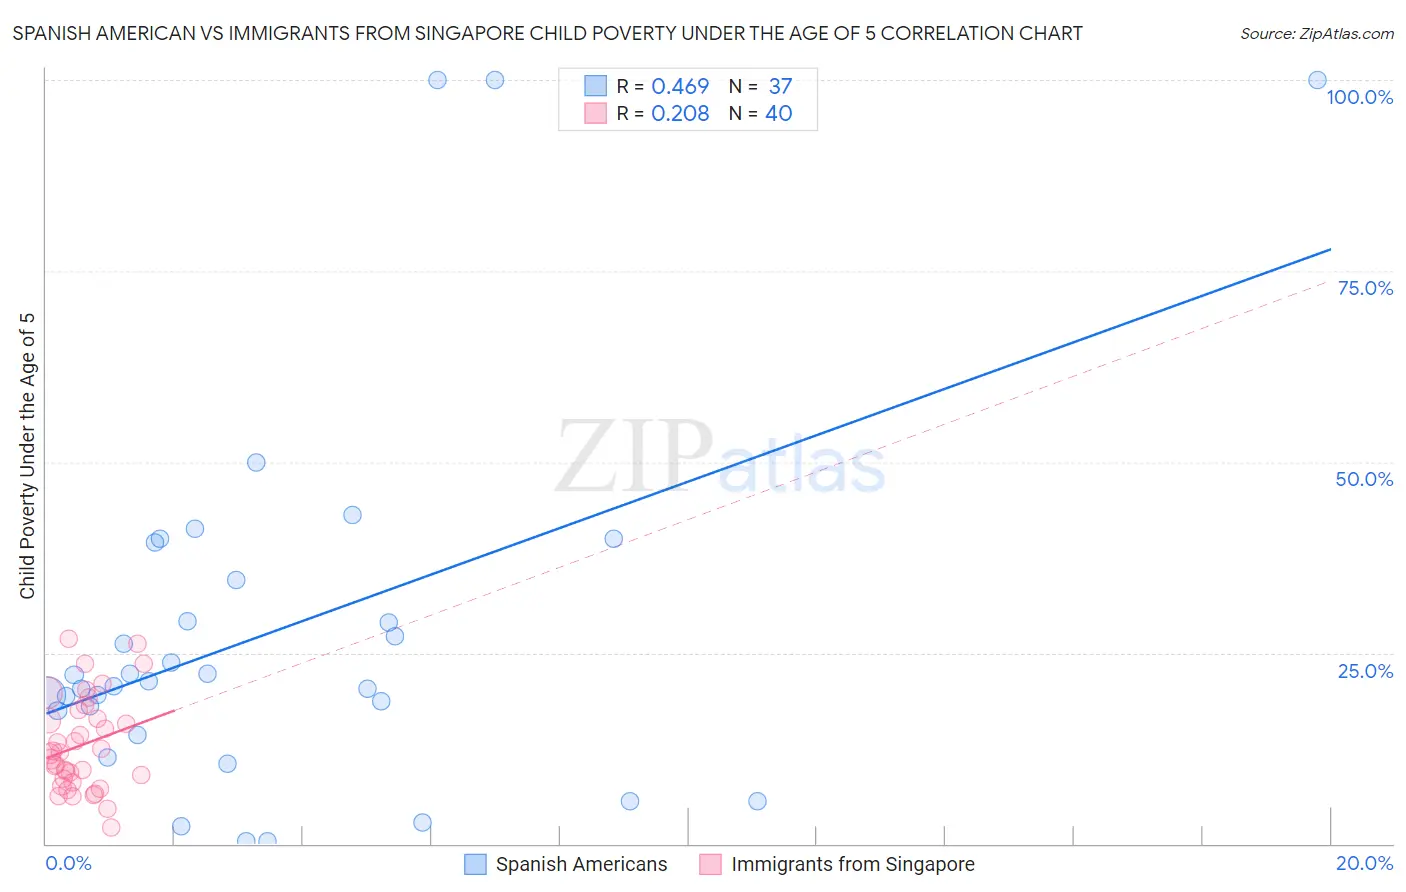 Spanish American vs Immigrants from Singapore Child Poverty Under the Age of 5